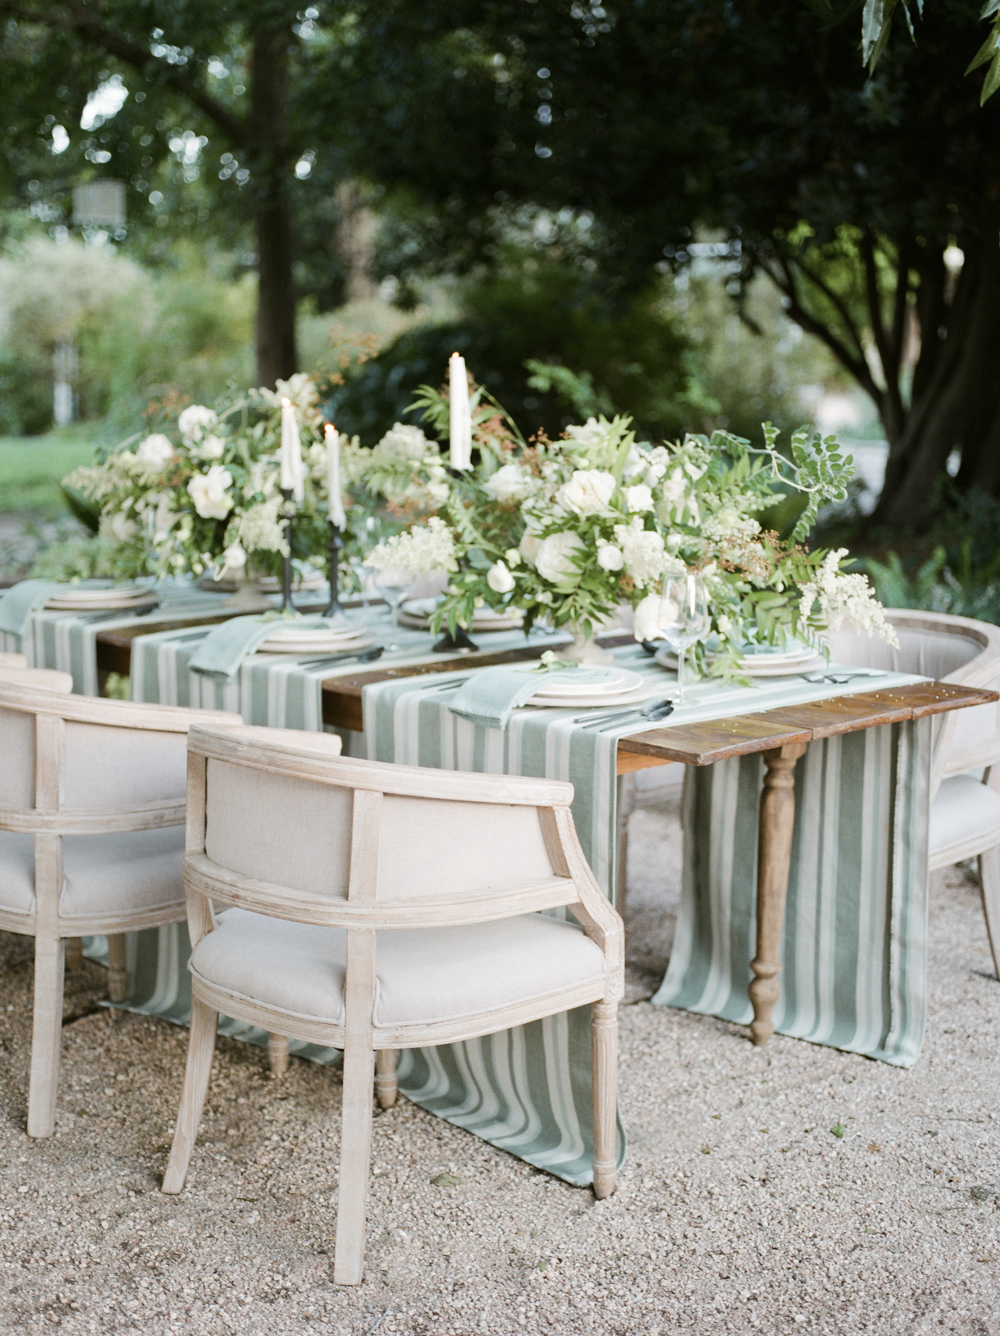 christine-gosch-barr-mansion-austin-wedding-venues-venue-simple-film-photographer-wedding-sparrow-alexandra-grecco-sprout-floals-feathers-and-frosting-classic-inspired-photography-mayhar-design22.jpg